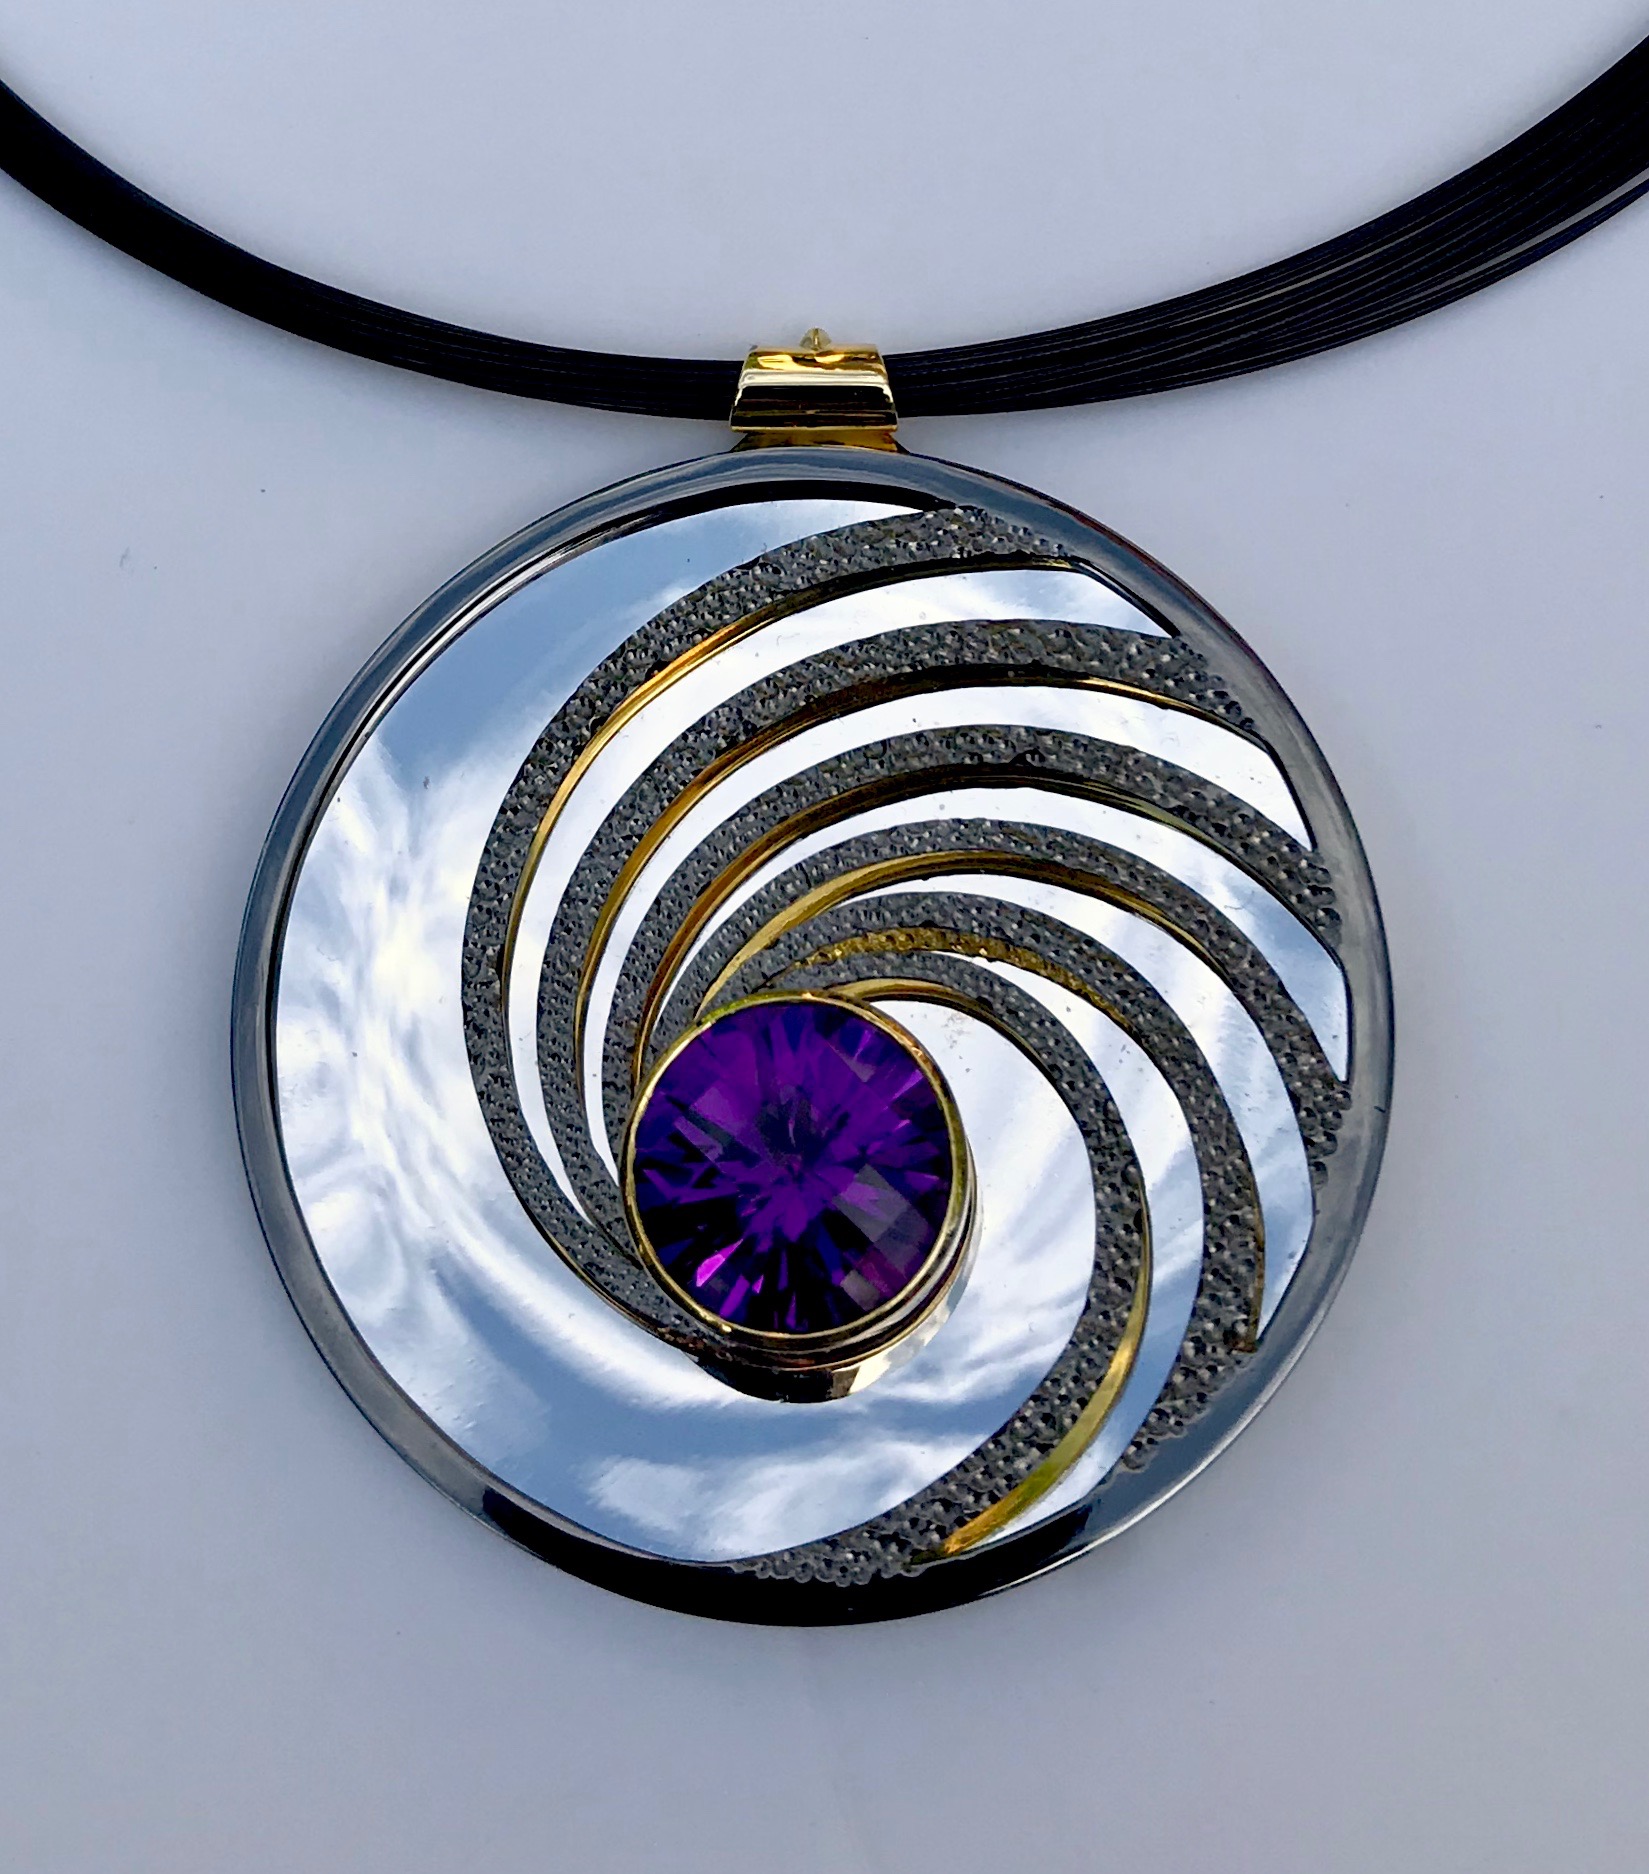 <a href="/node/295">Swinging on a Star. Dark Amethyst / Silver / Part Gilded part Rhodium Plate / the mirror on the inside back will reflect whatever its facing - here it’s the Sky.</a>